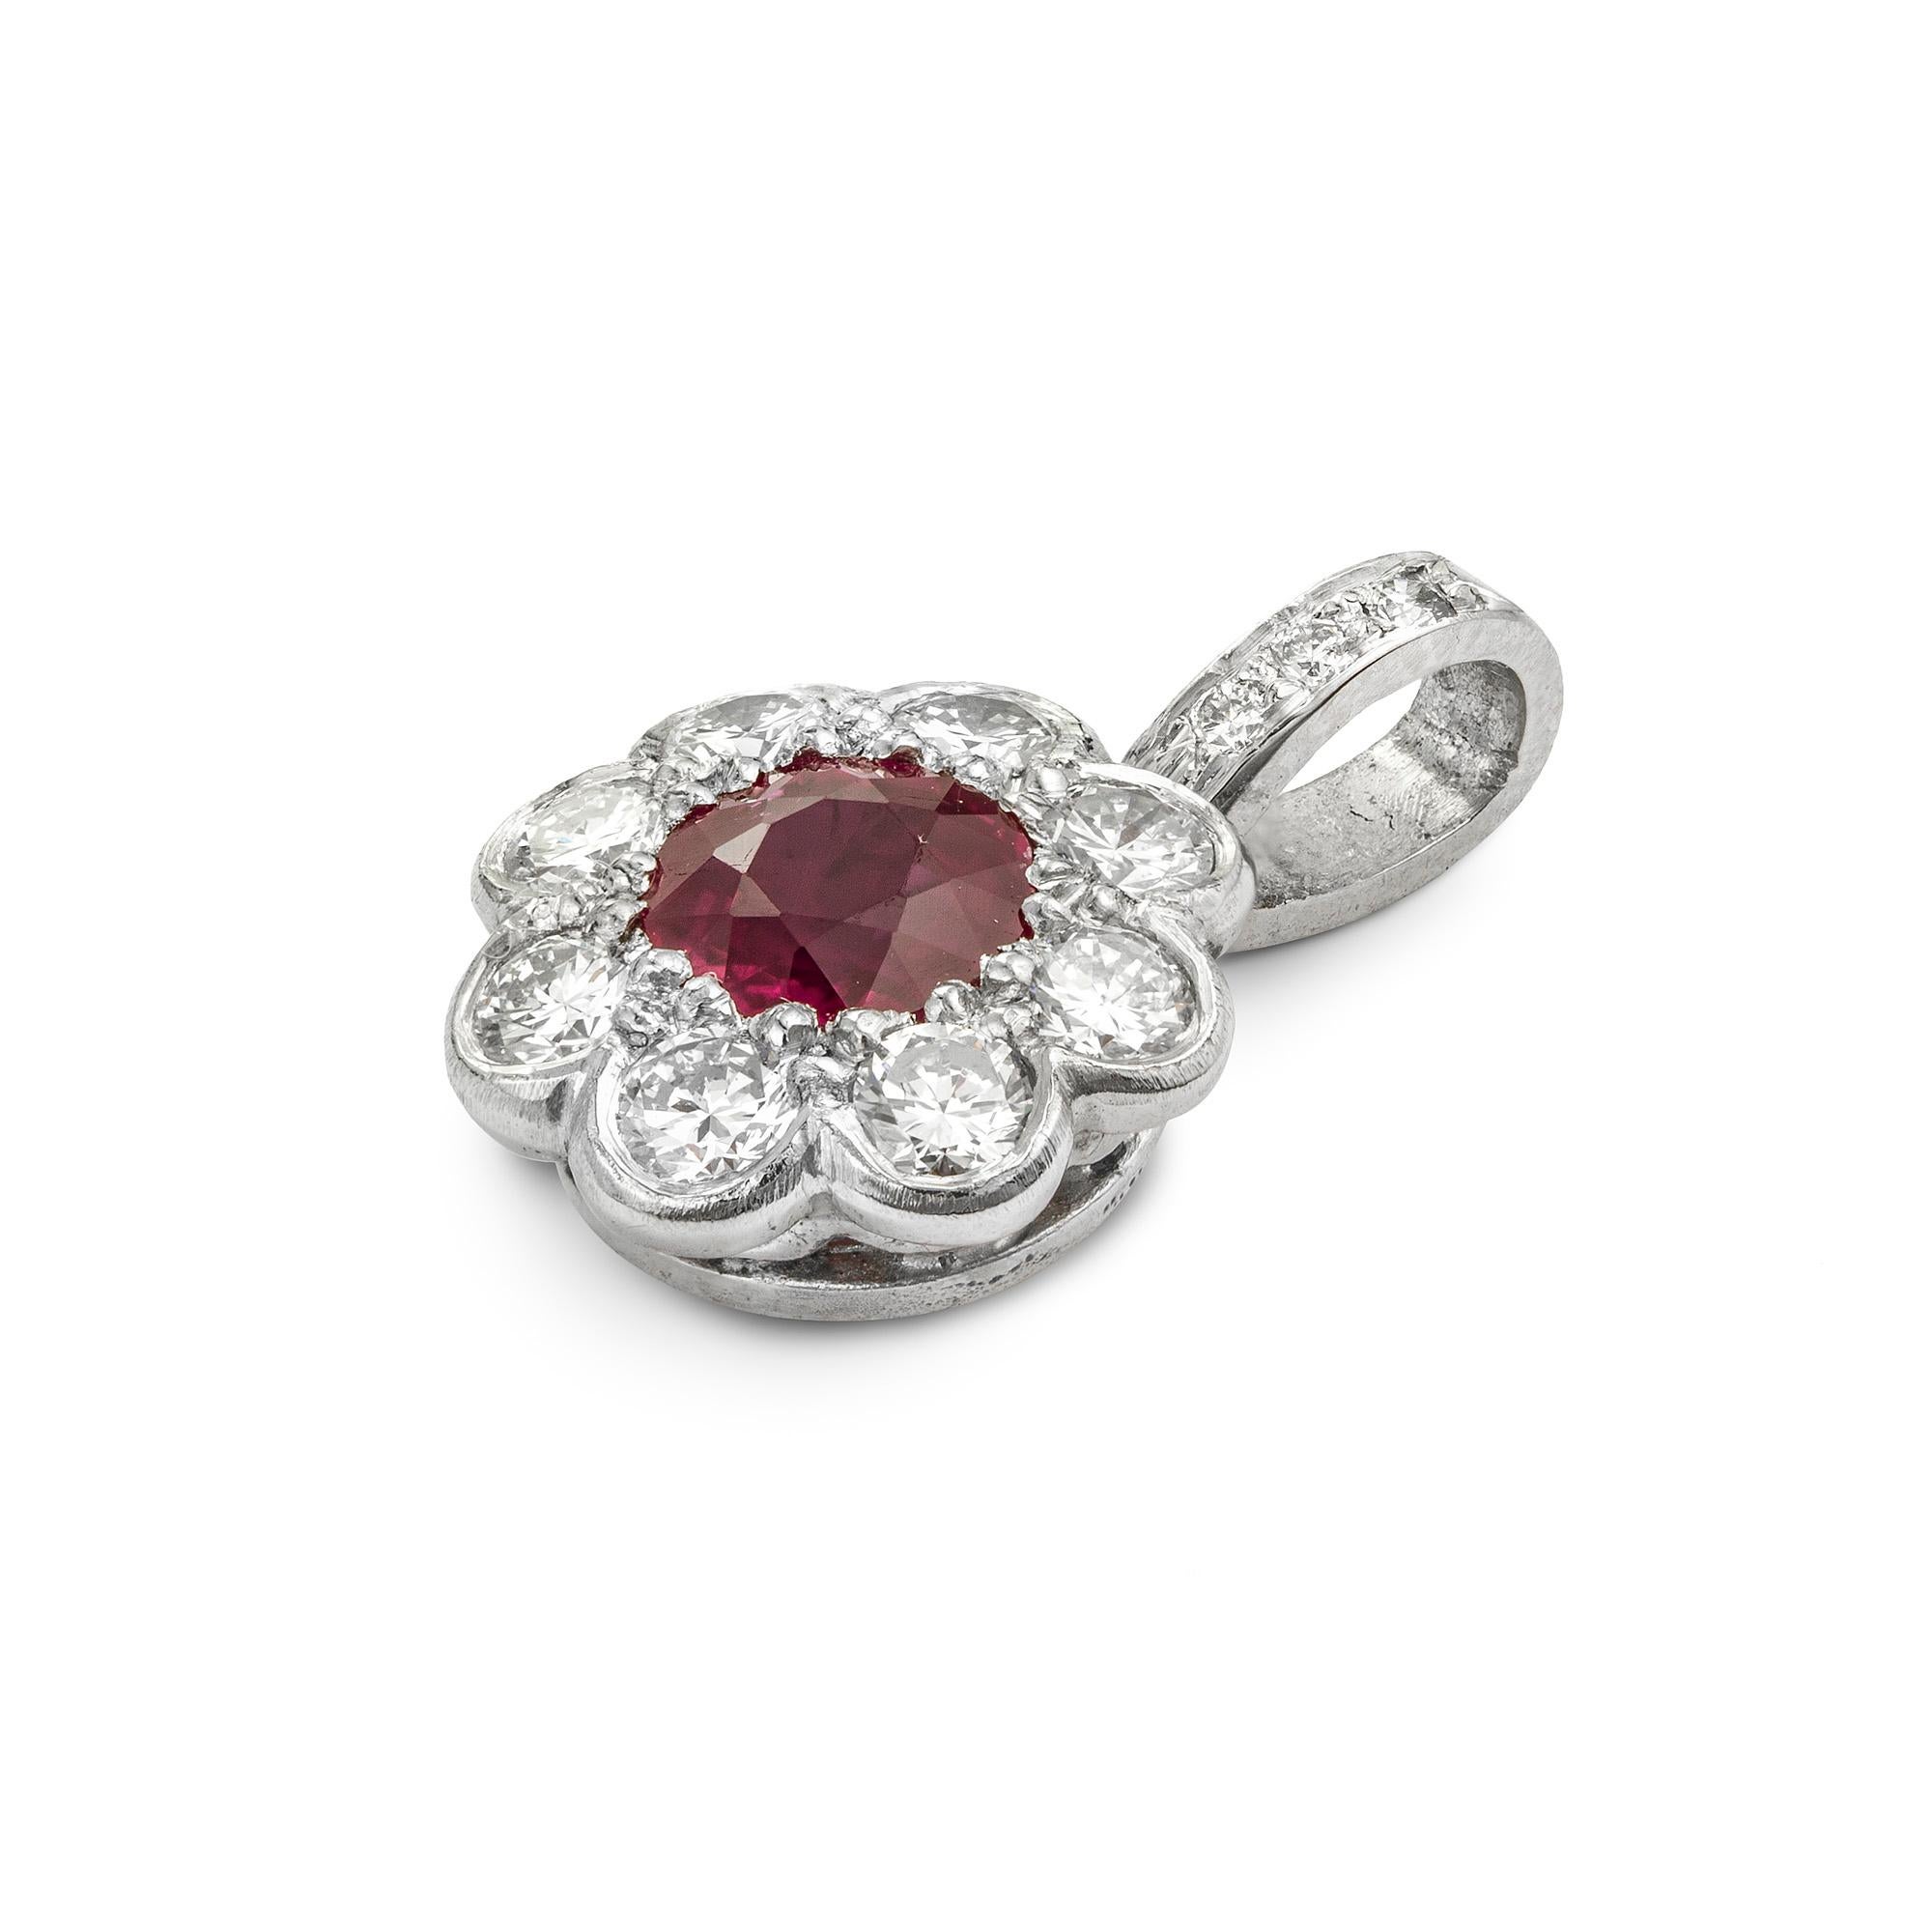 A ruby and diamond cluster pendant, the centre a round brilliant-cut ruby, to weigh 0.53ct, surrounded by a border of round brilliant-cut diamonds, to weigh 0.3ct, all millegrain set in platinum, suspended from a diamond set loop, hallmarked 950